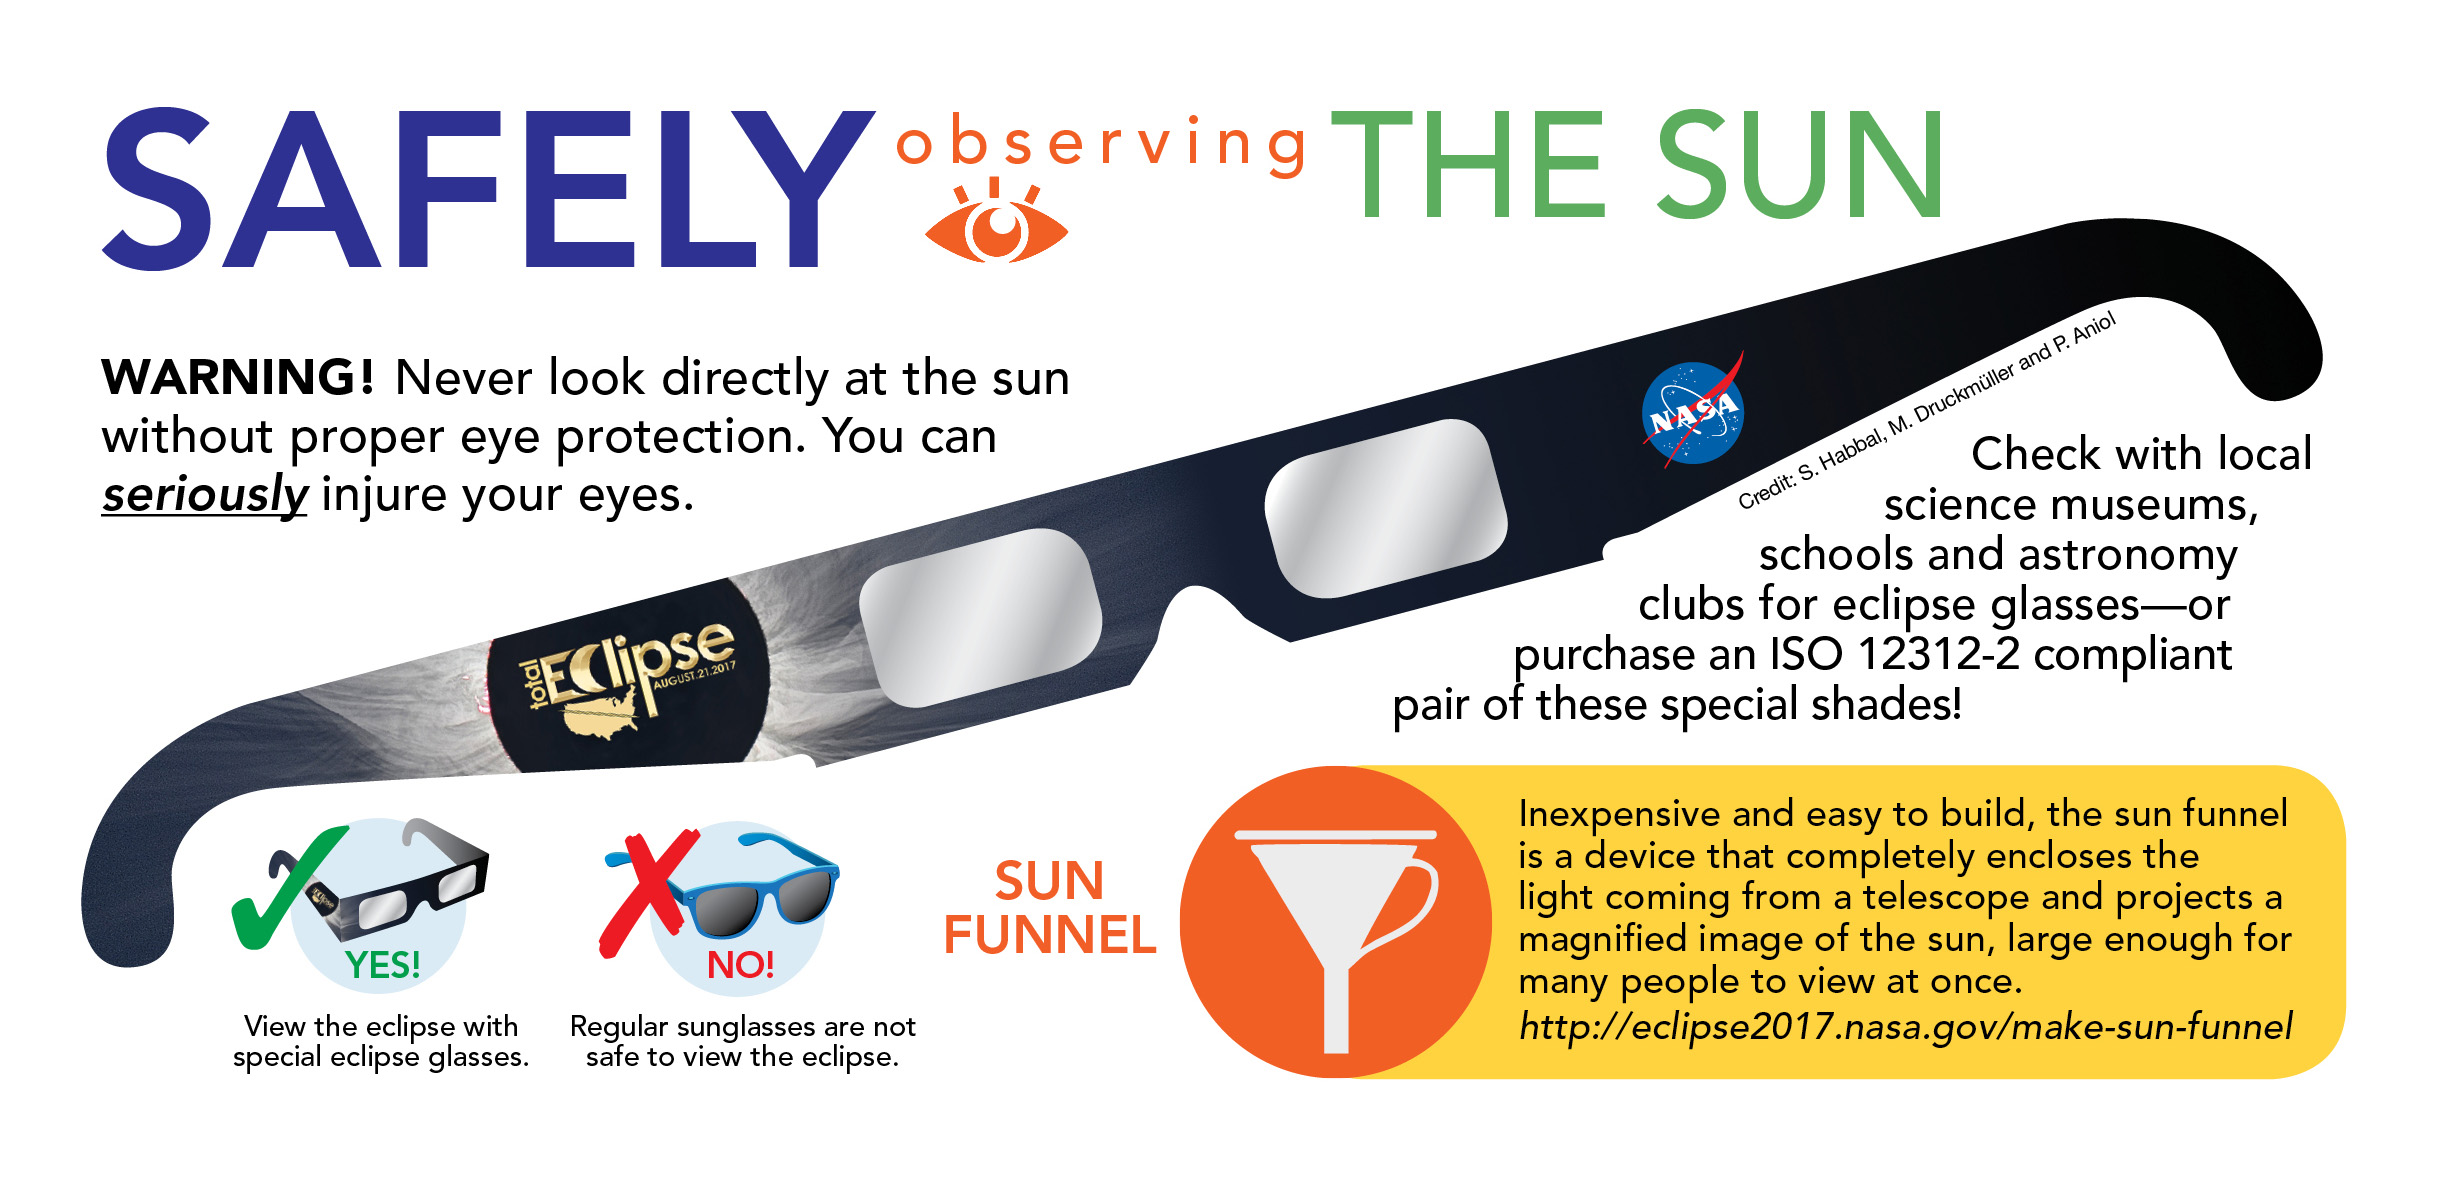 safely observing the sun graphic